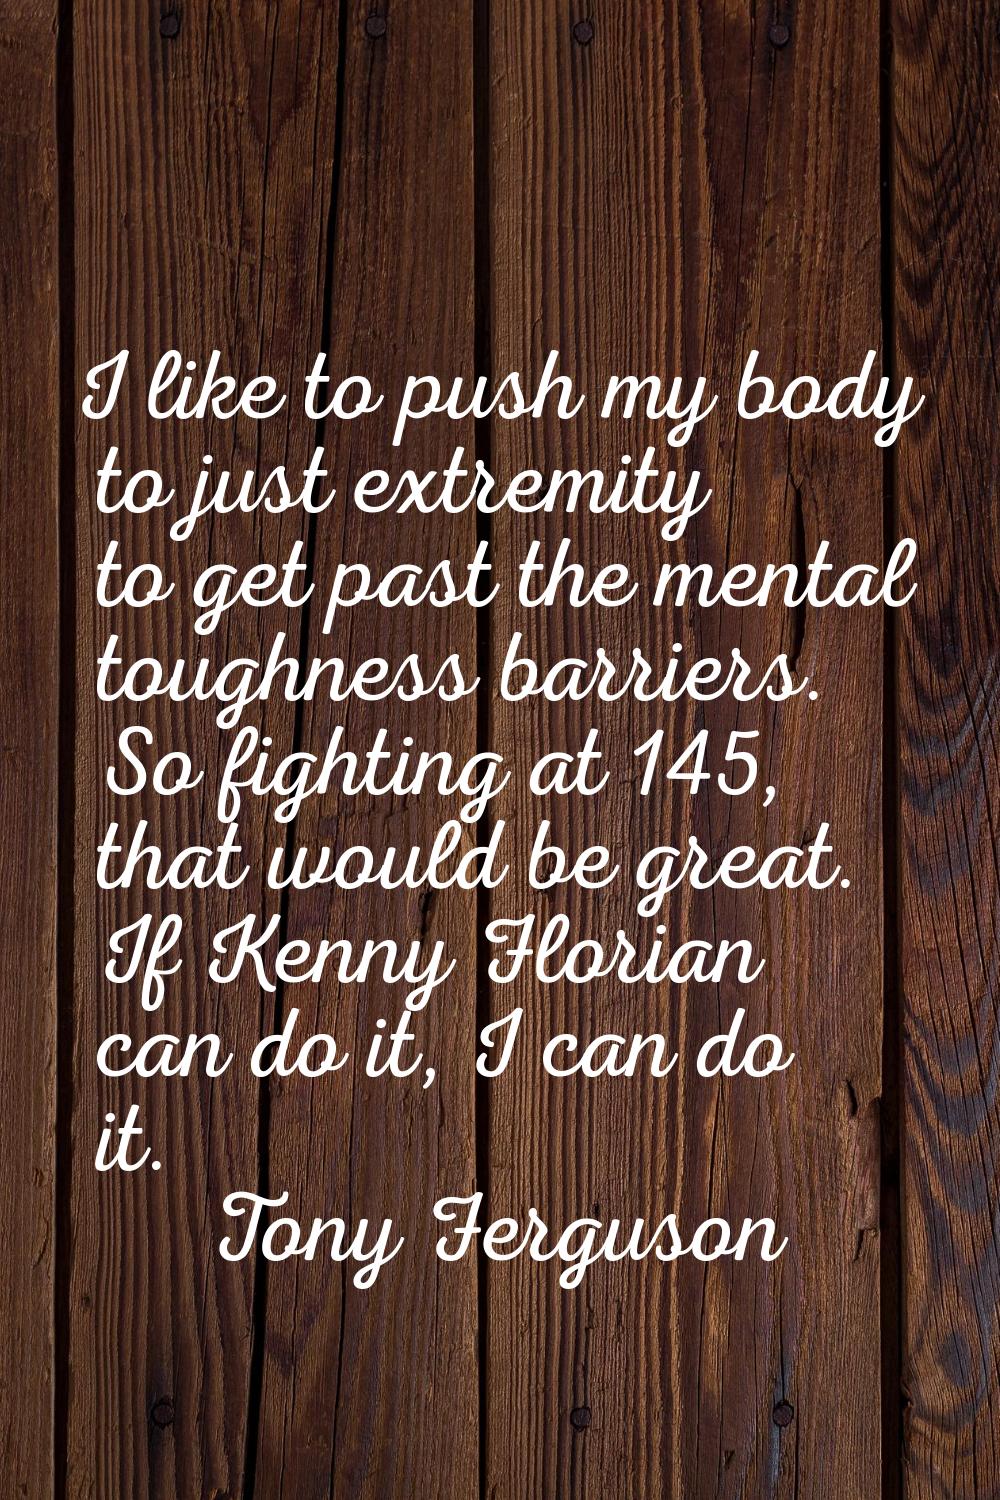 I like to push my body to just extremity to get past the mental toughness barriers. So fighting at 